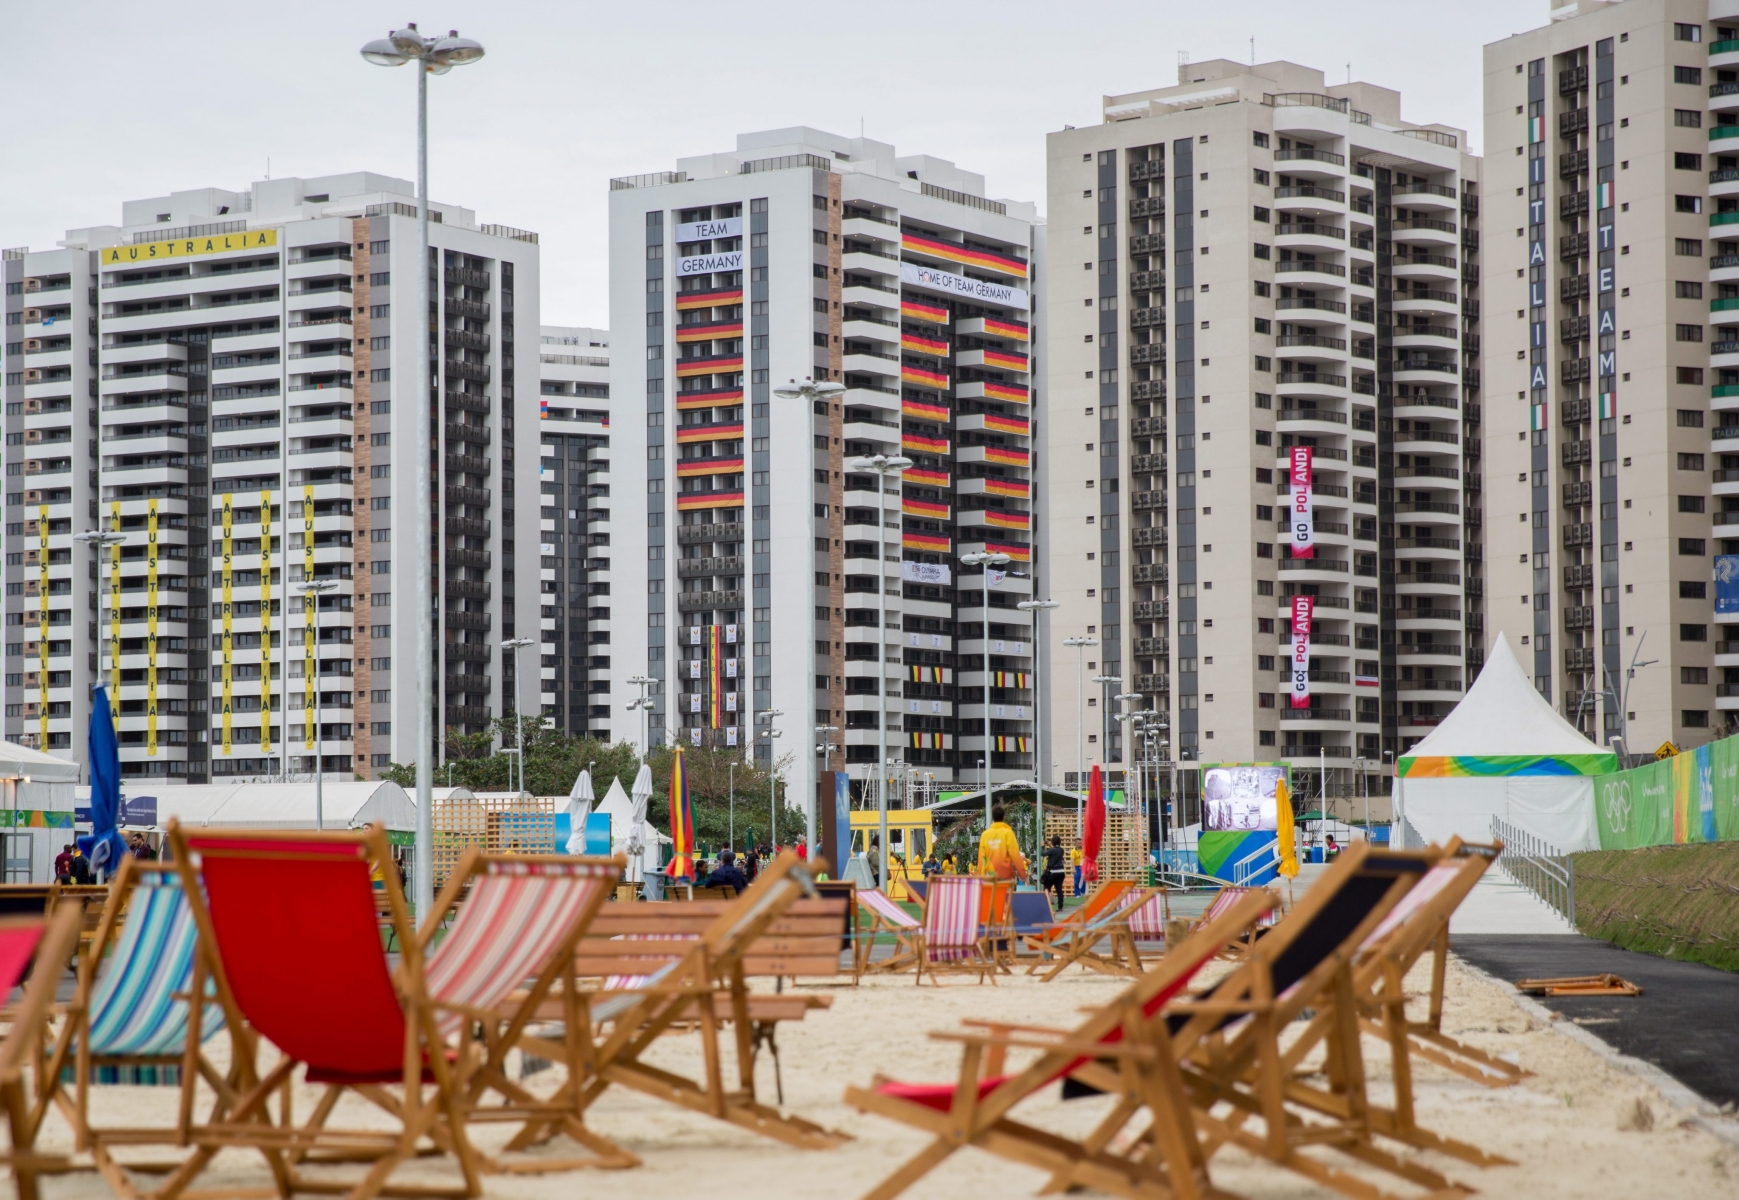 epa05446174 A view of the accommodation building of the delegations of (L-R) Australia, Germany, Poland and Italy from behind a beach area with sun loungers in the Olympic village in Rio de Janeiro,†Brazil, 28 July 2016. The 2016 Olympic Games will take place in Rio de Janeiro from 05 to 21 August 2016.  EPA/Michael Kappeler BRAZIL RIO 2016 OLYMPIC GAMES